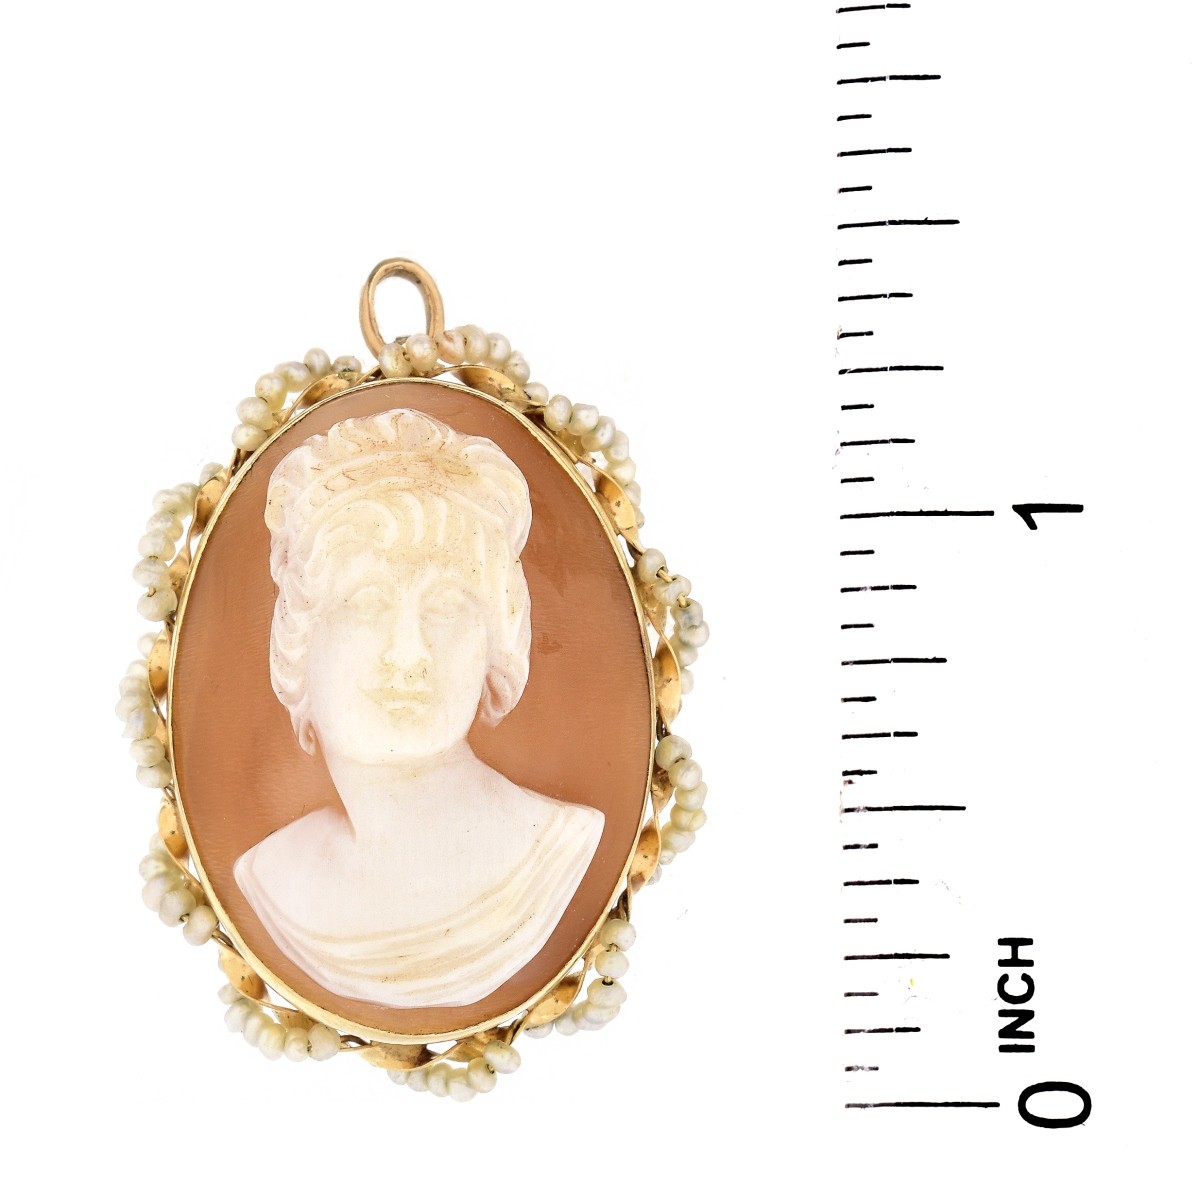 14K Gold and Seed Pearl Cameo Pendant Brooch